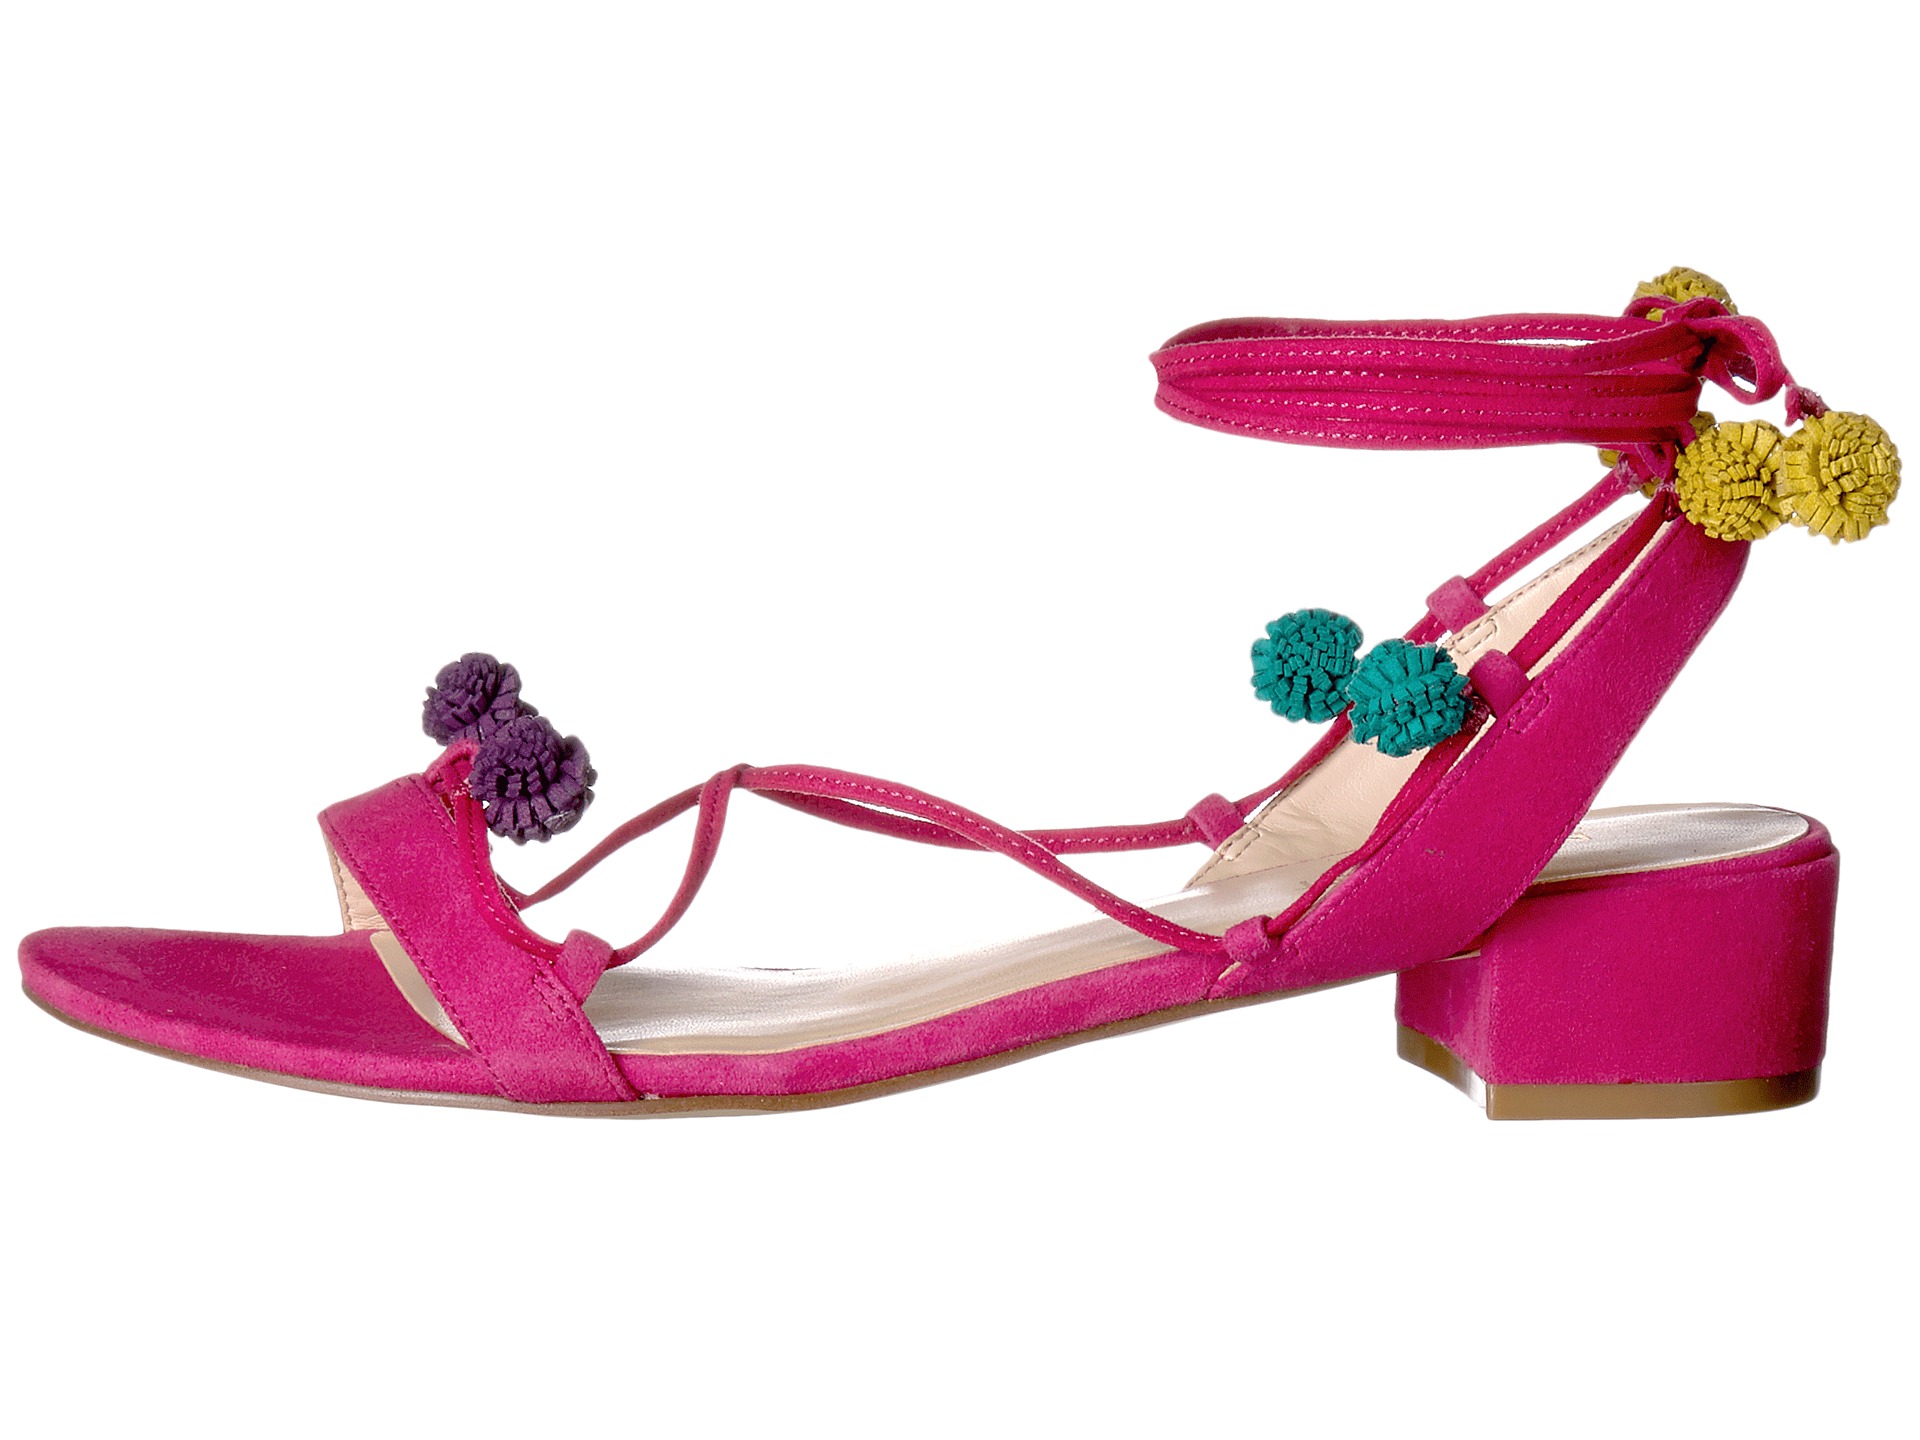 Nine West Rizzah Pink Suede - Zappos.com Free Shipping BOTH Ways